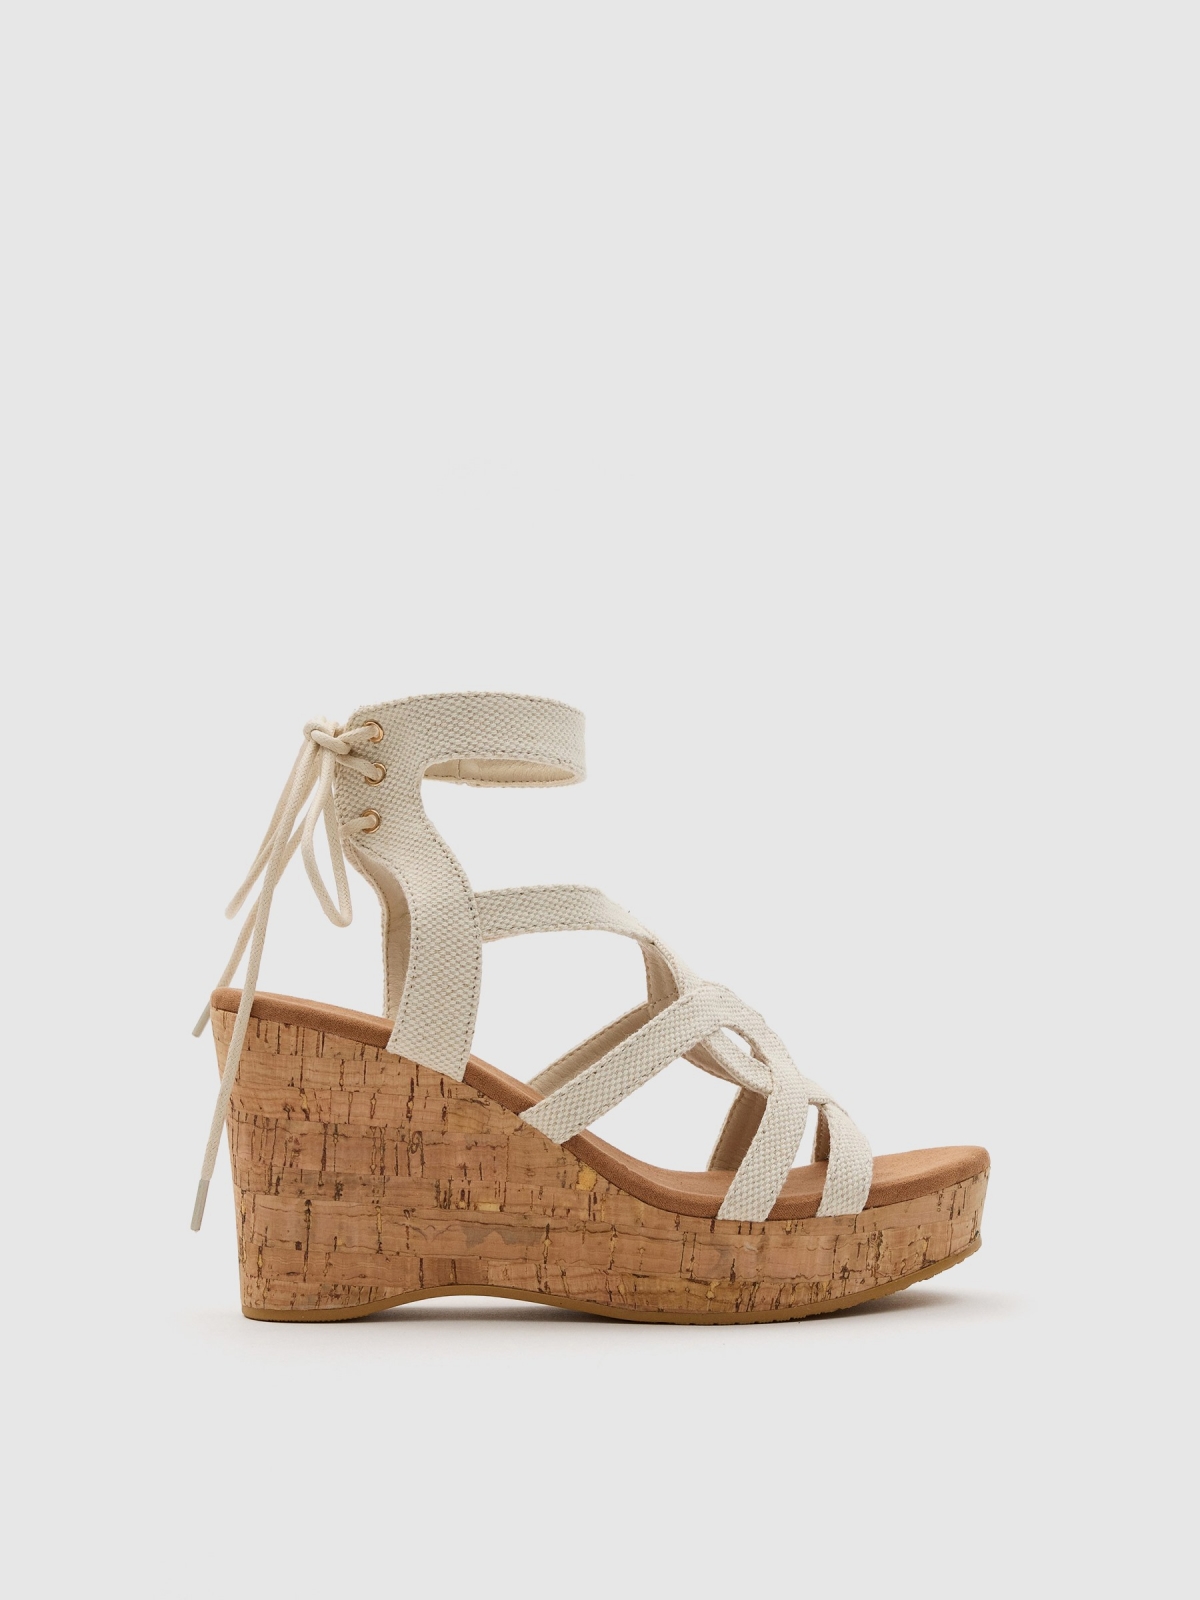 Wedges with lace-up straps sand